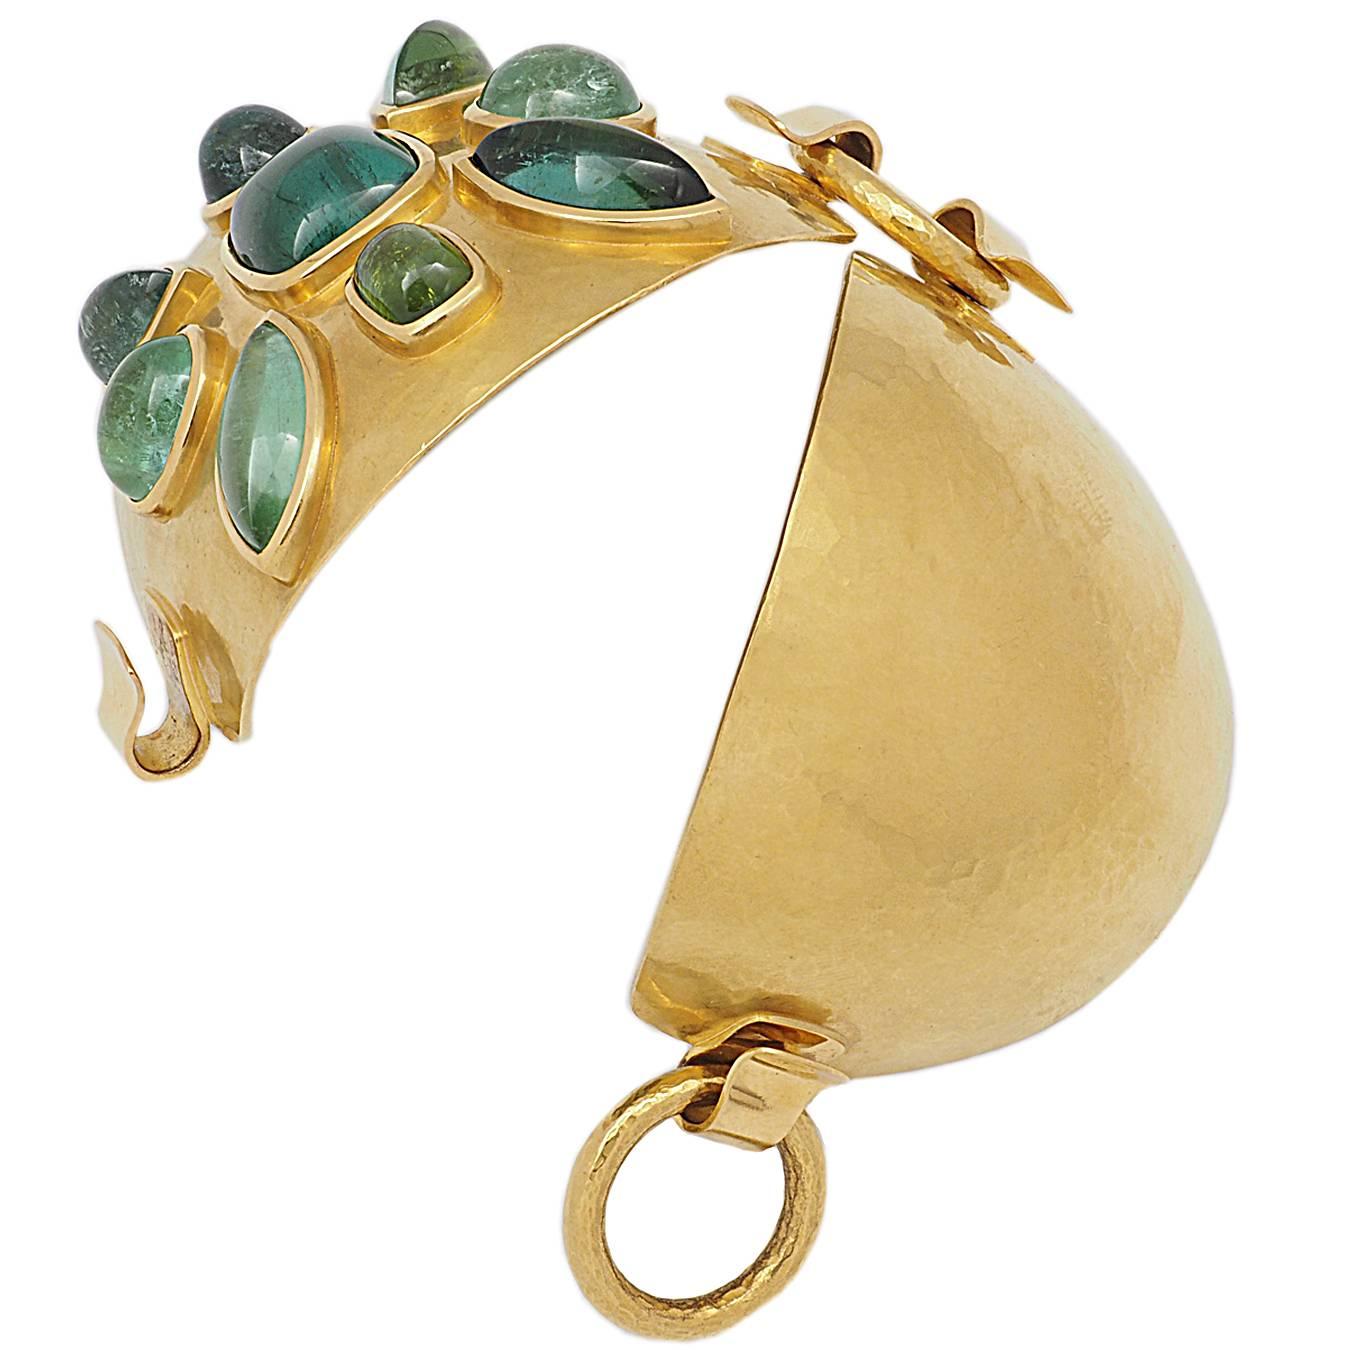 Colleen B. Rosenblat designed this marvellous bracelet.
22k hammered yellow gold encase this 9 beautiful green tourmalines cabochons 77.42 ct arranged as a flower.
This is definitely an eye-catcher for everyone!
length: 18 cm
width: 55 mm